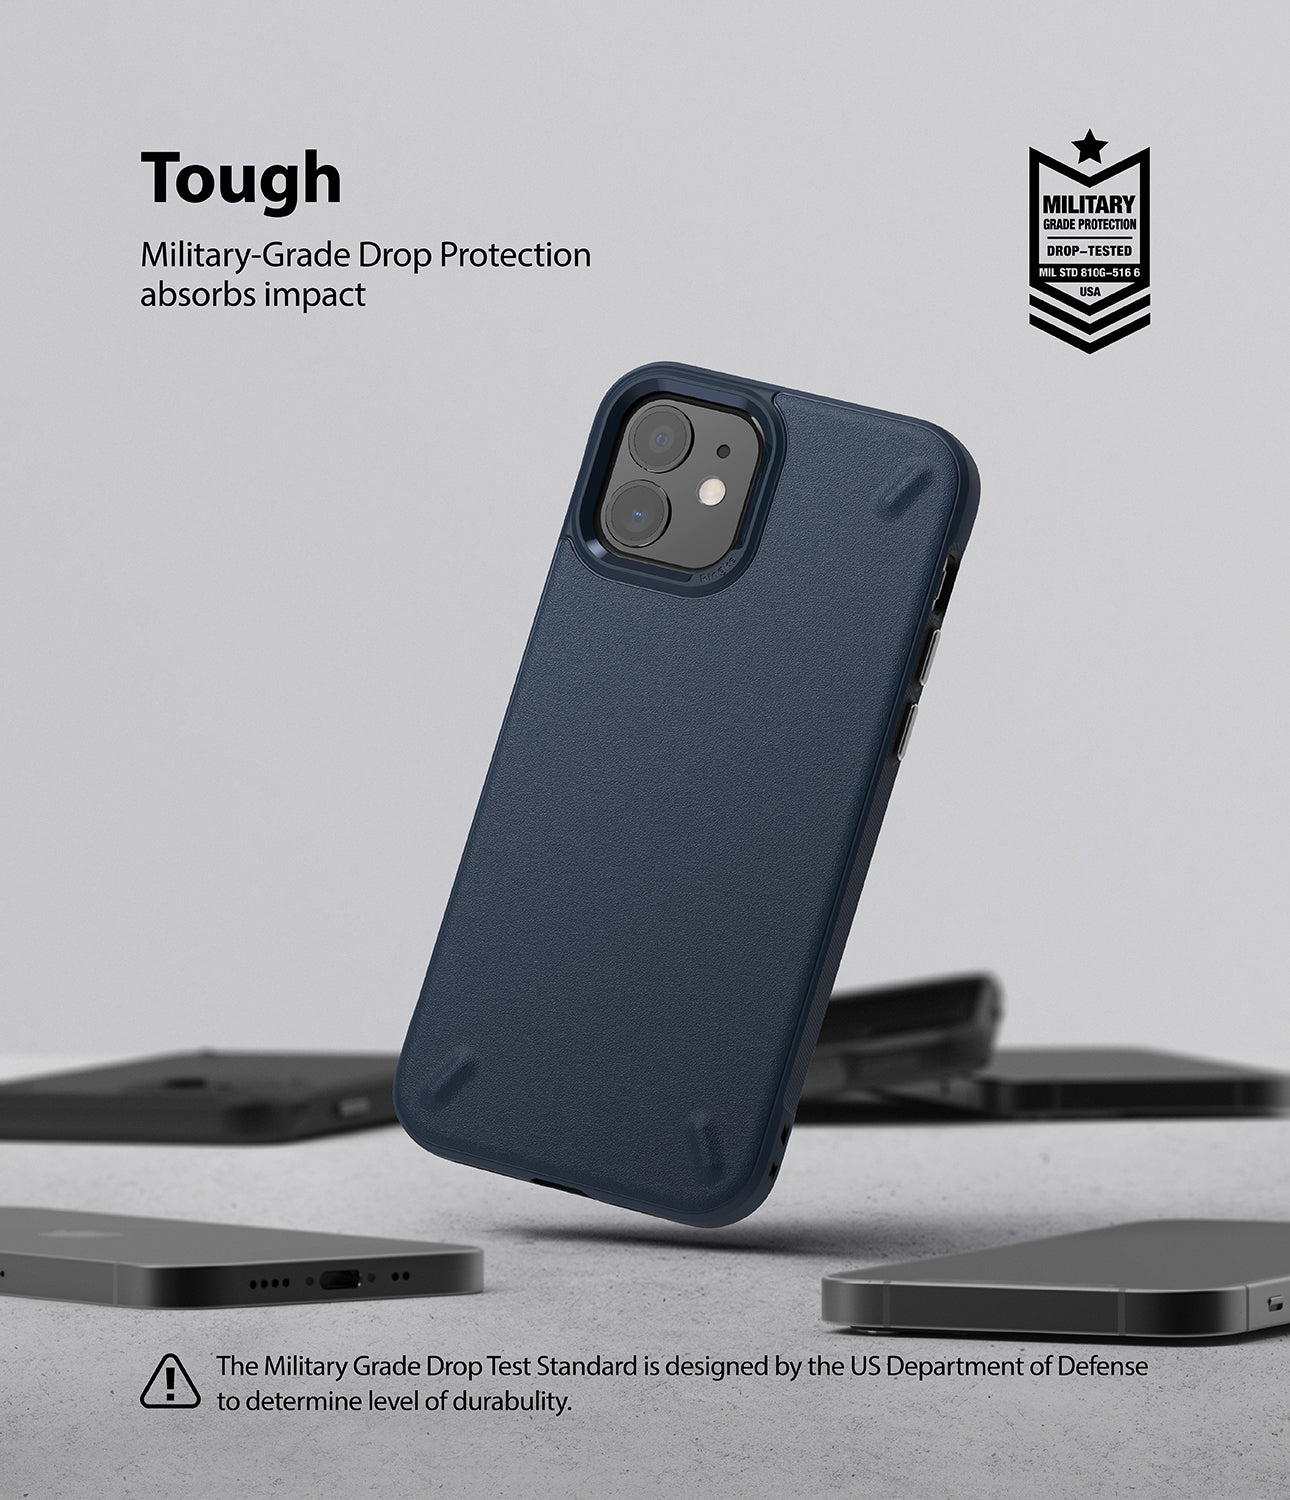 iPhone 12 Mini Case | Onyx - Tough. Military-Grade Drop Protection absorbs impact.